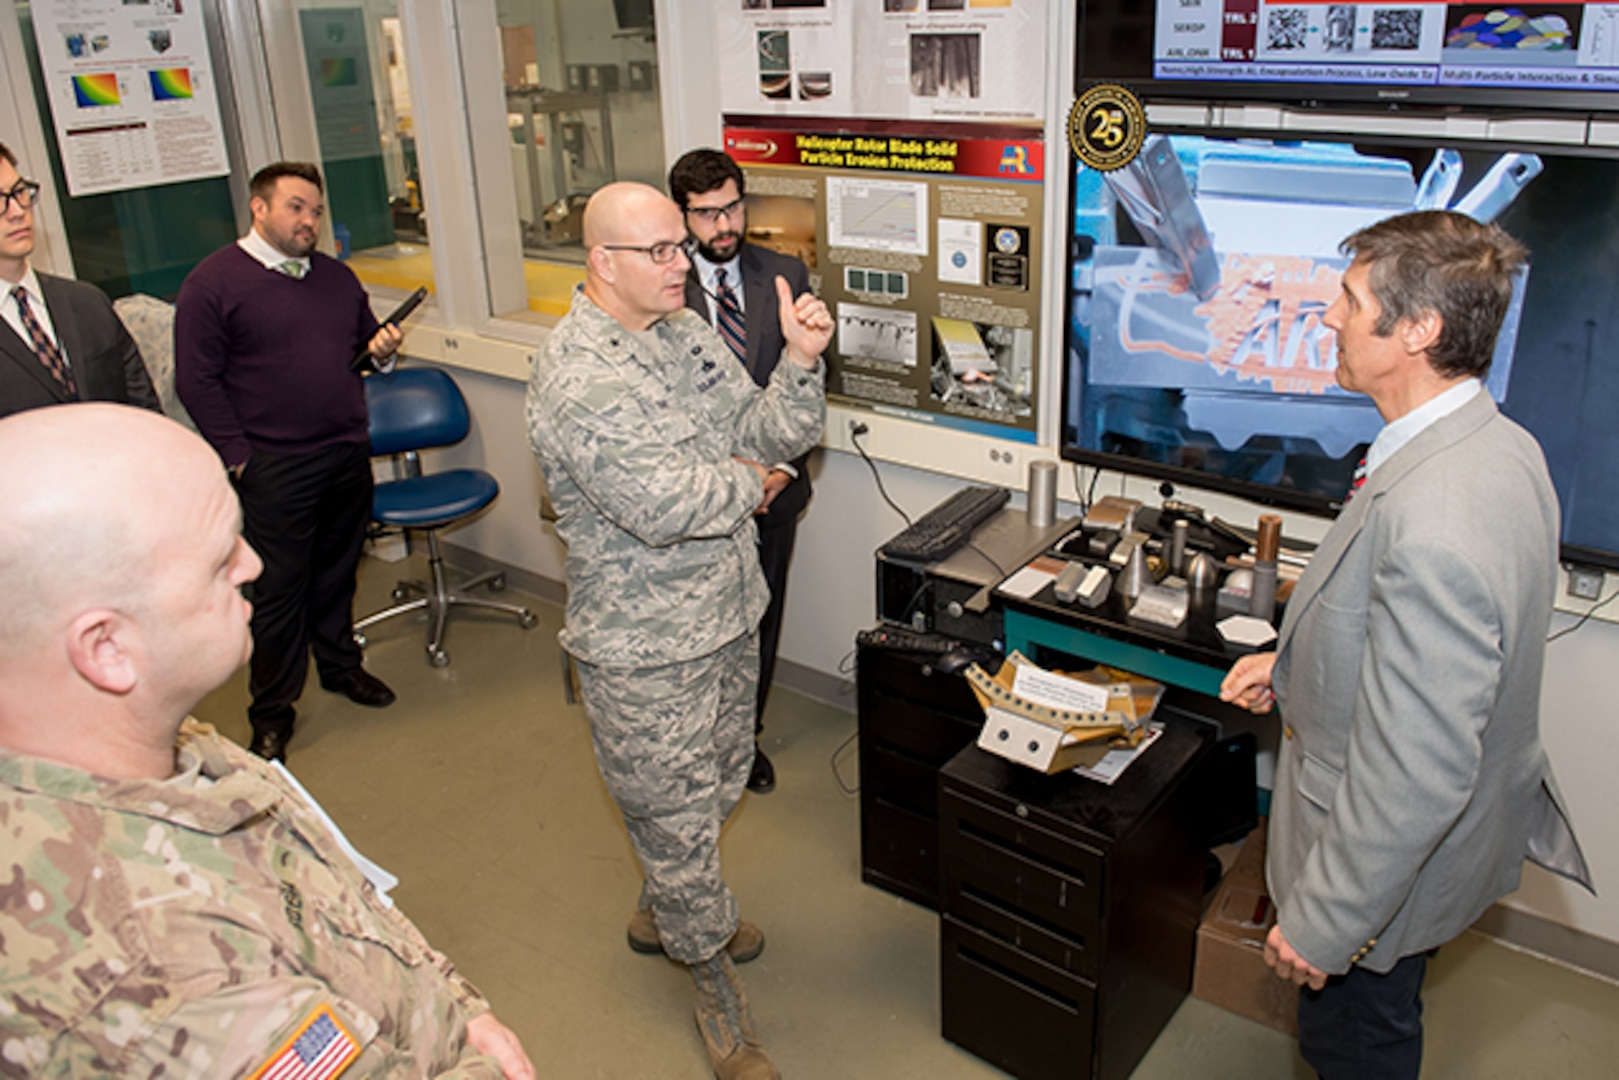 Defense Logistics Agency Aviation Commander Air Force Brig. Gen. Allan Day talks with Victor Champagne, U.S. Army Research Laboratory's Advanced Materials and Processes team leader, during a facilities tour at Aberdeen Proving Ground, Maryland, Feb. 23, 2017.